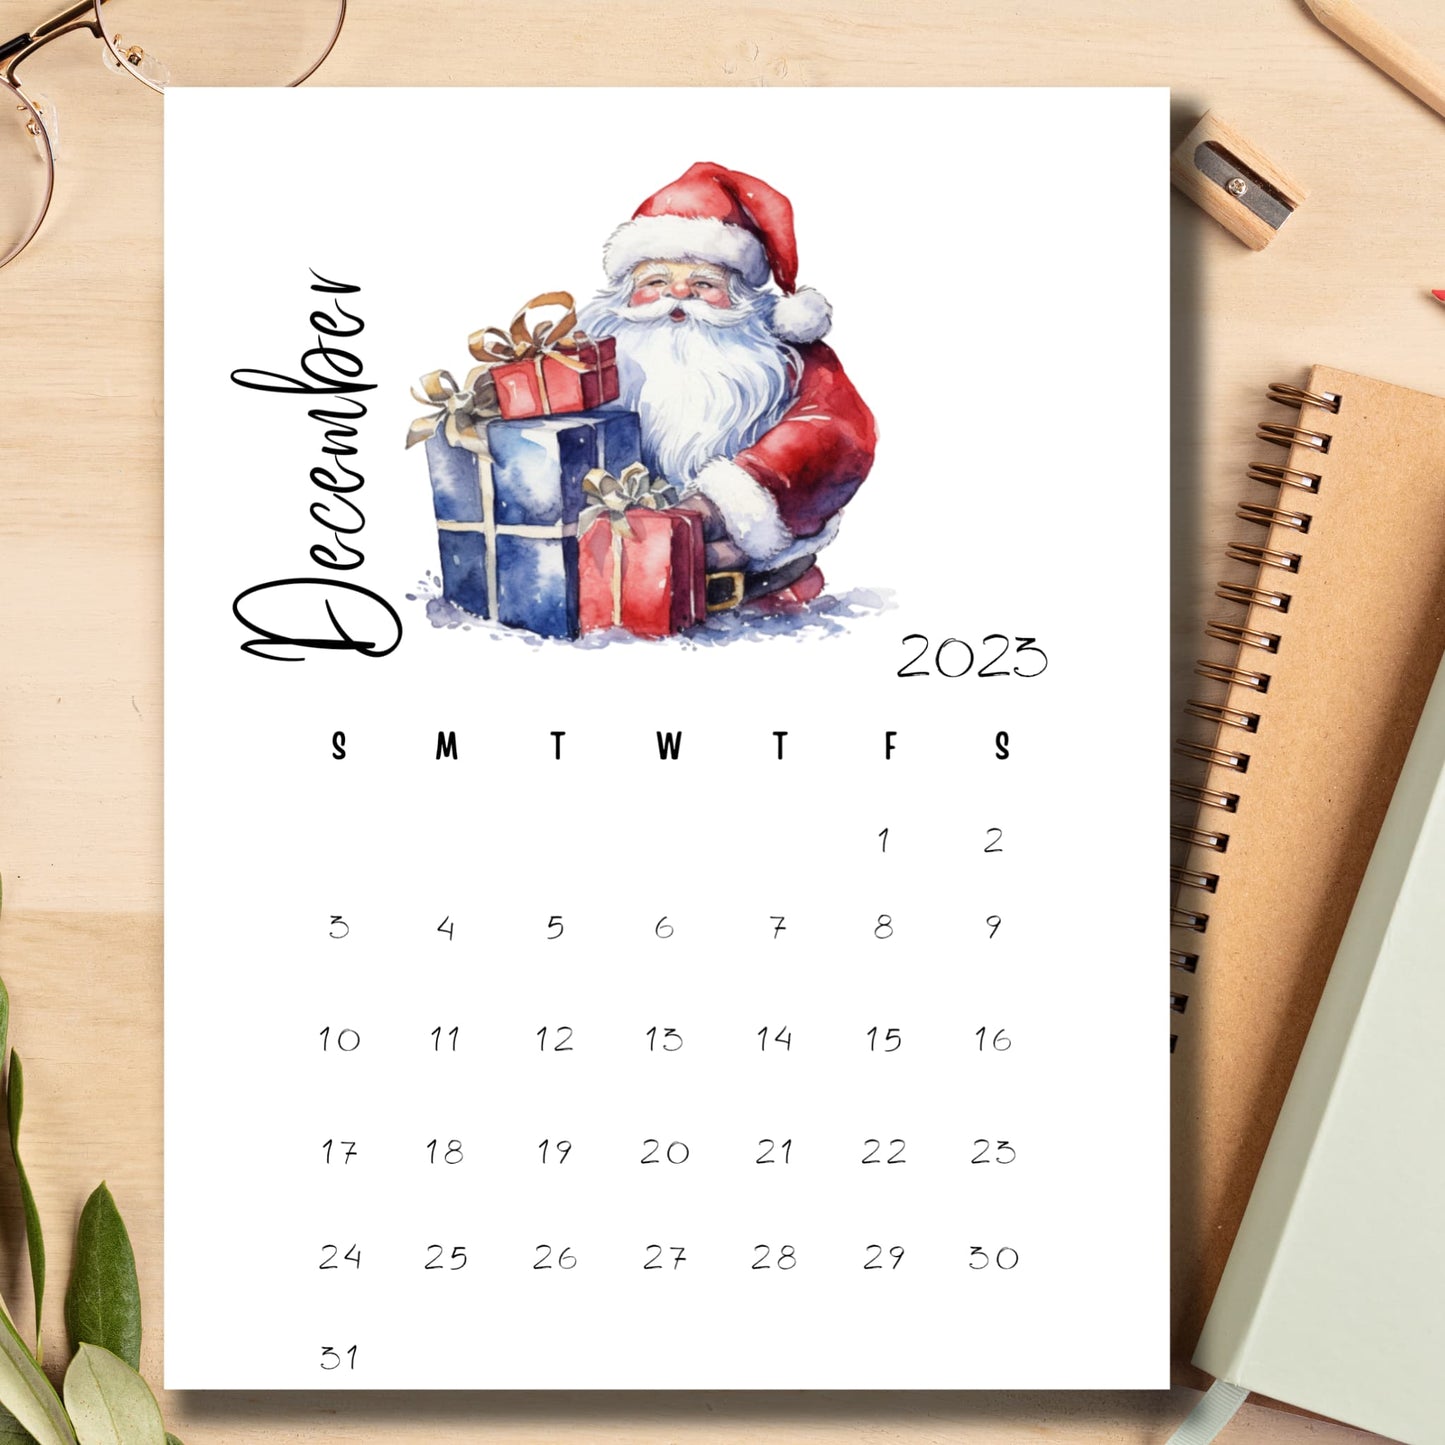 Organize with style using Sarsari Creations’ 2023 December Printable Calendar, featured alongside matching notebooks to seamlessly blend your holiday planning and note-taking.